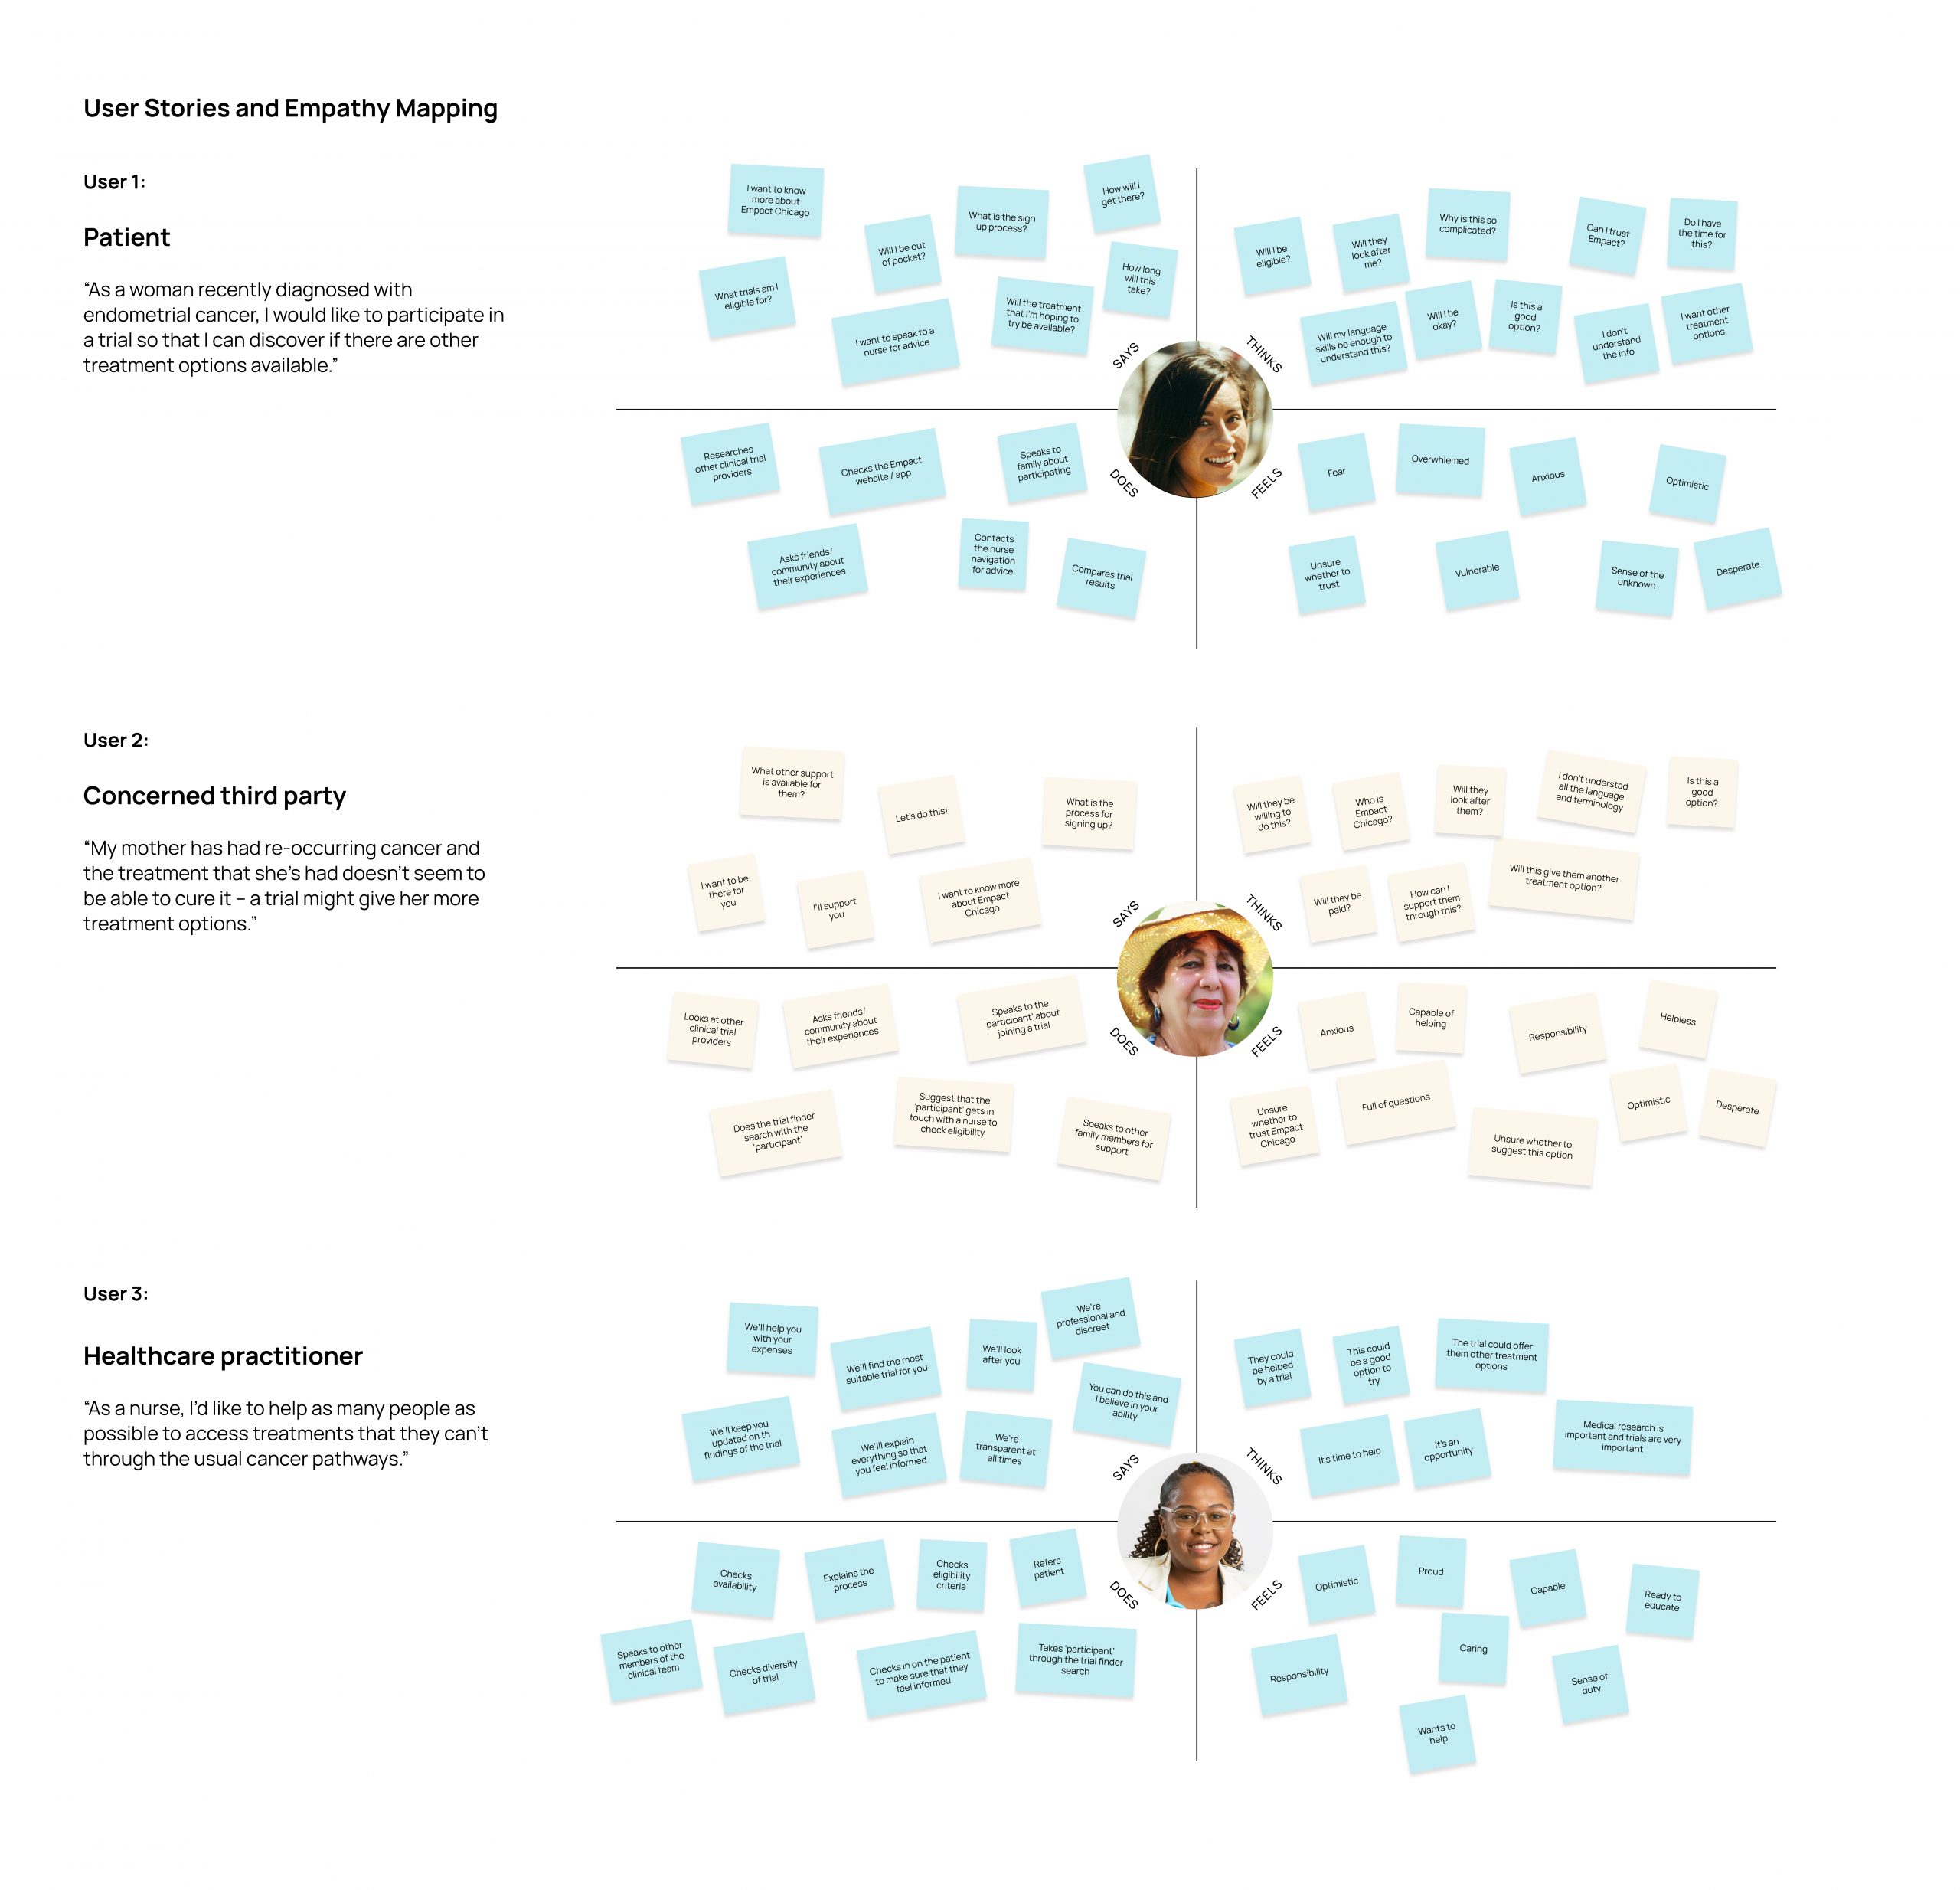 An empathy map showing the user stories for three different users of the Empact Chicago trial finder; User 1: the patient, User 2: a concerned third party and User 3: a healthcare practitioner.